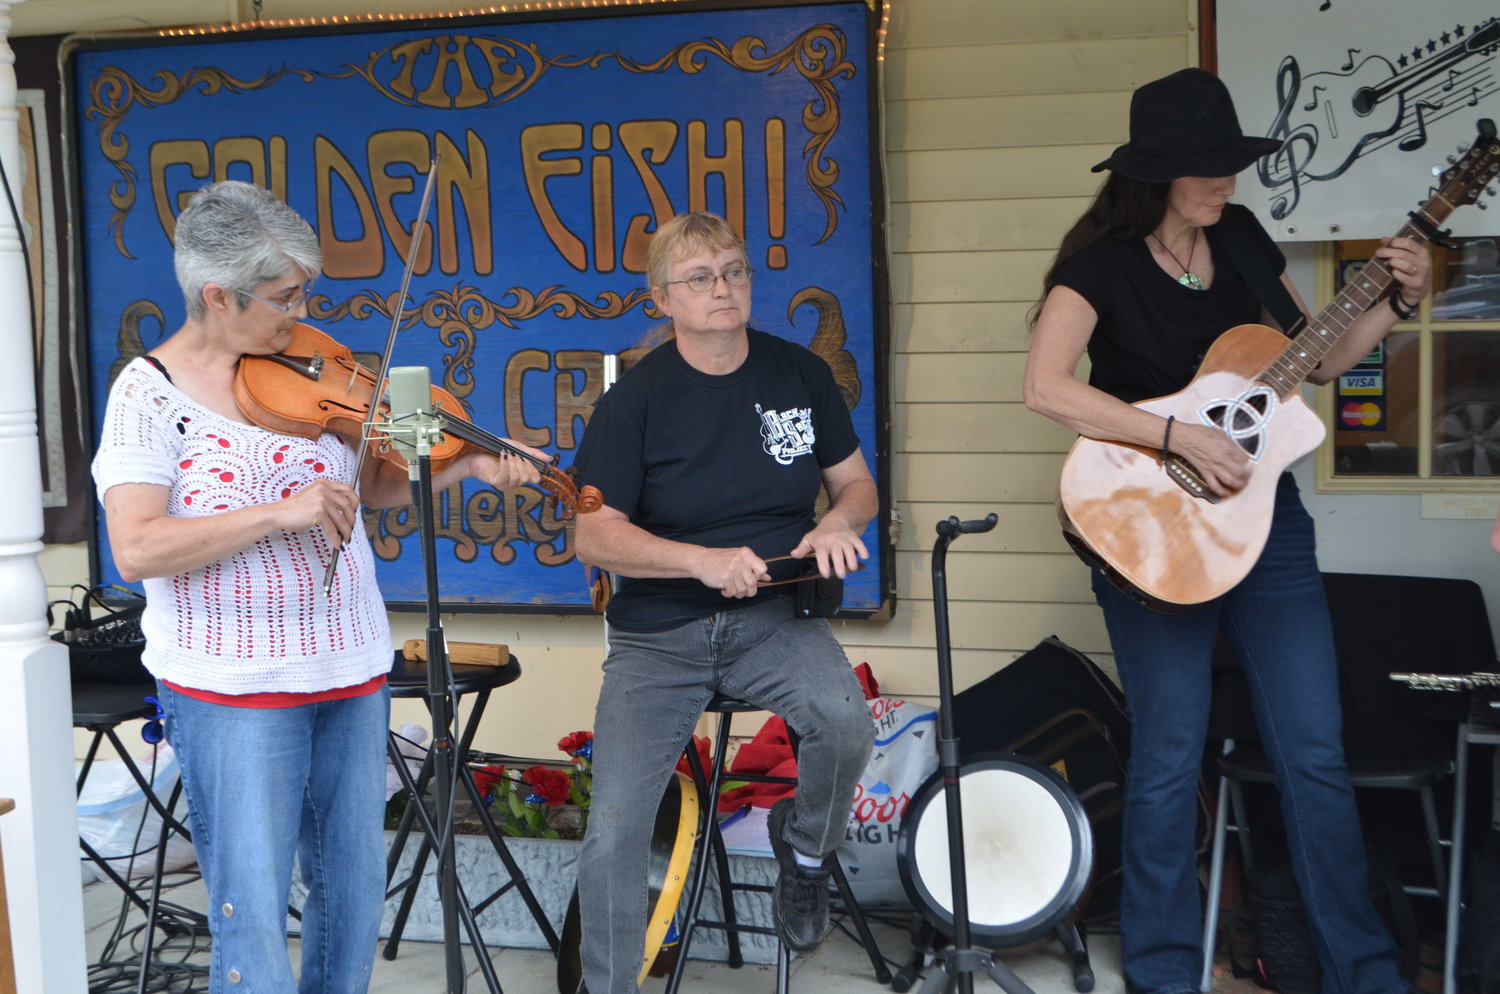 The Black Sage Project earned a crowd around them as they played well known folk and country songs.